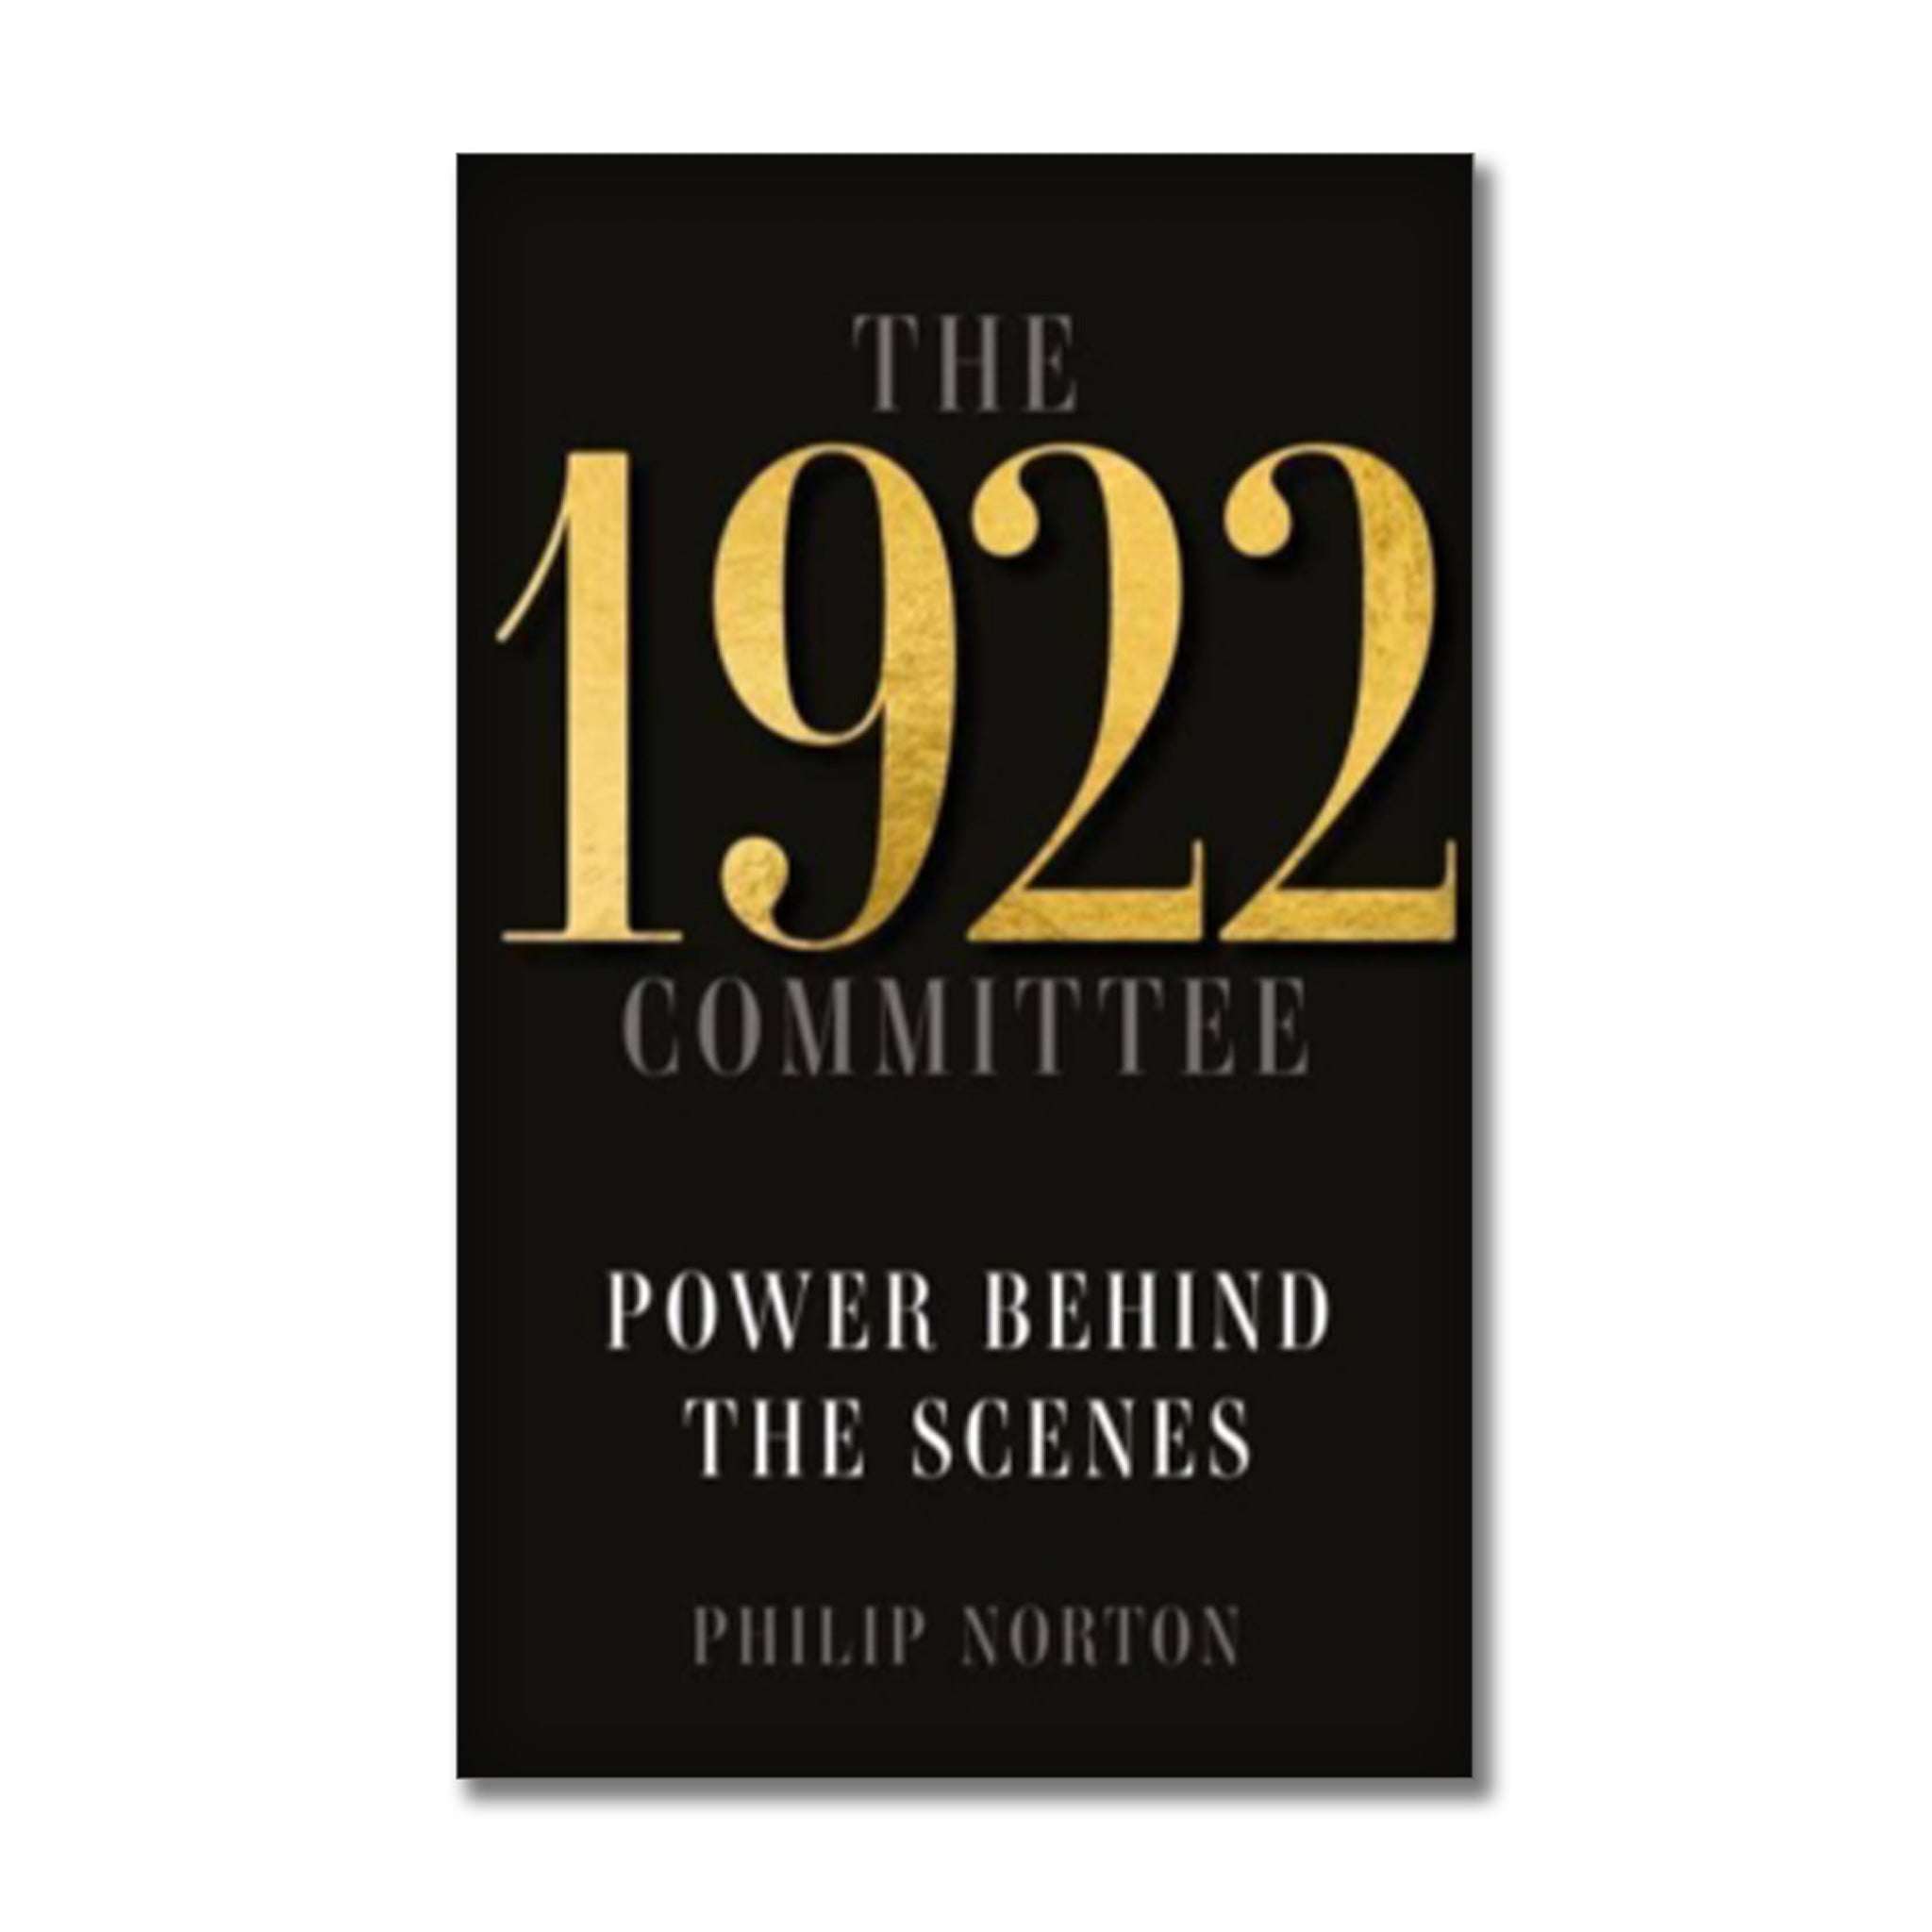 The 1922 Committee: Power Behind the Scenes